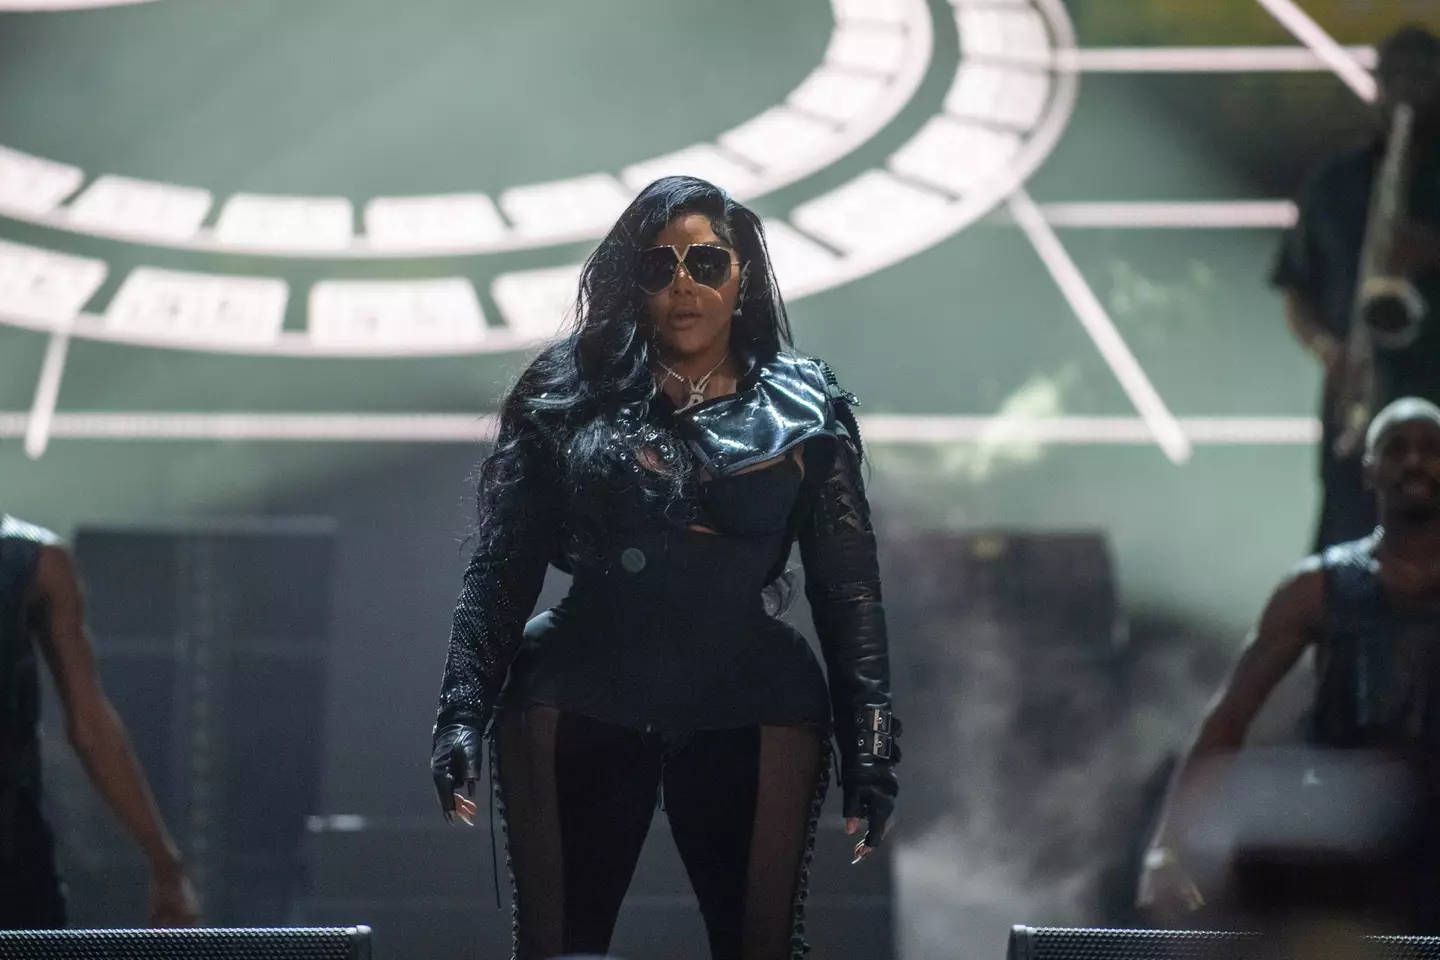 Lil Kim was performing at ONE MusicFest in Atlanta, Georgia on Saturday (28 October) when she decided to pull the stunt.